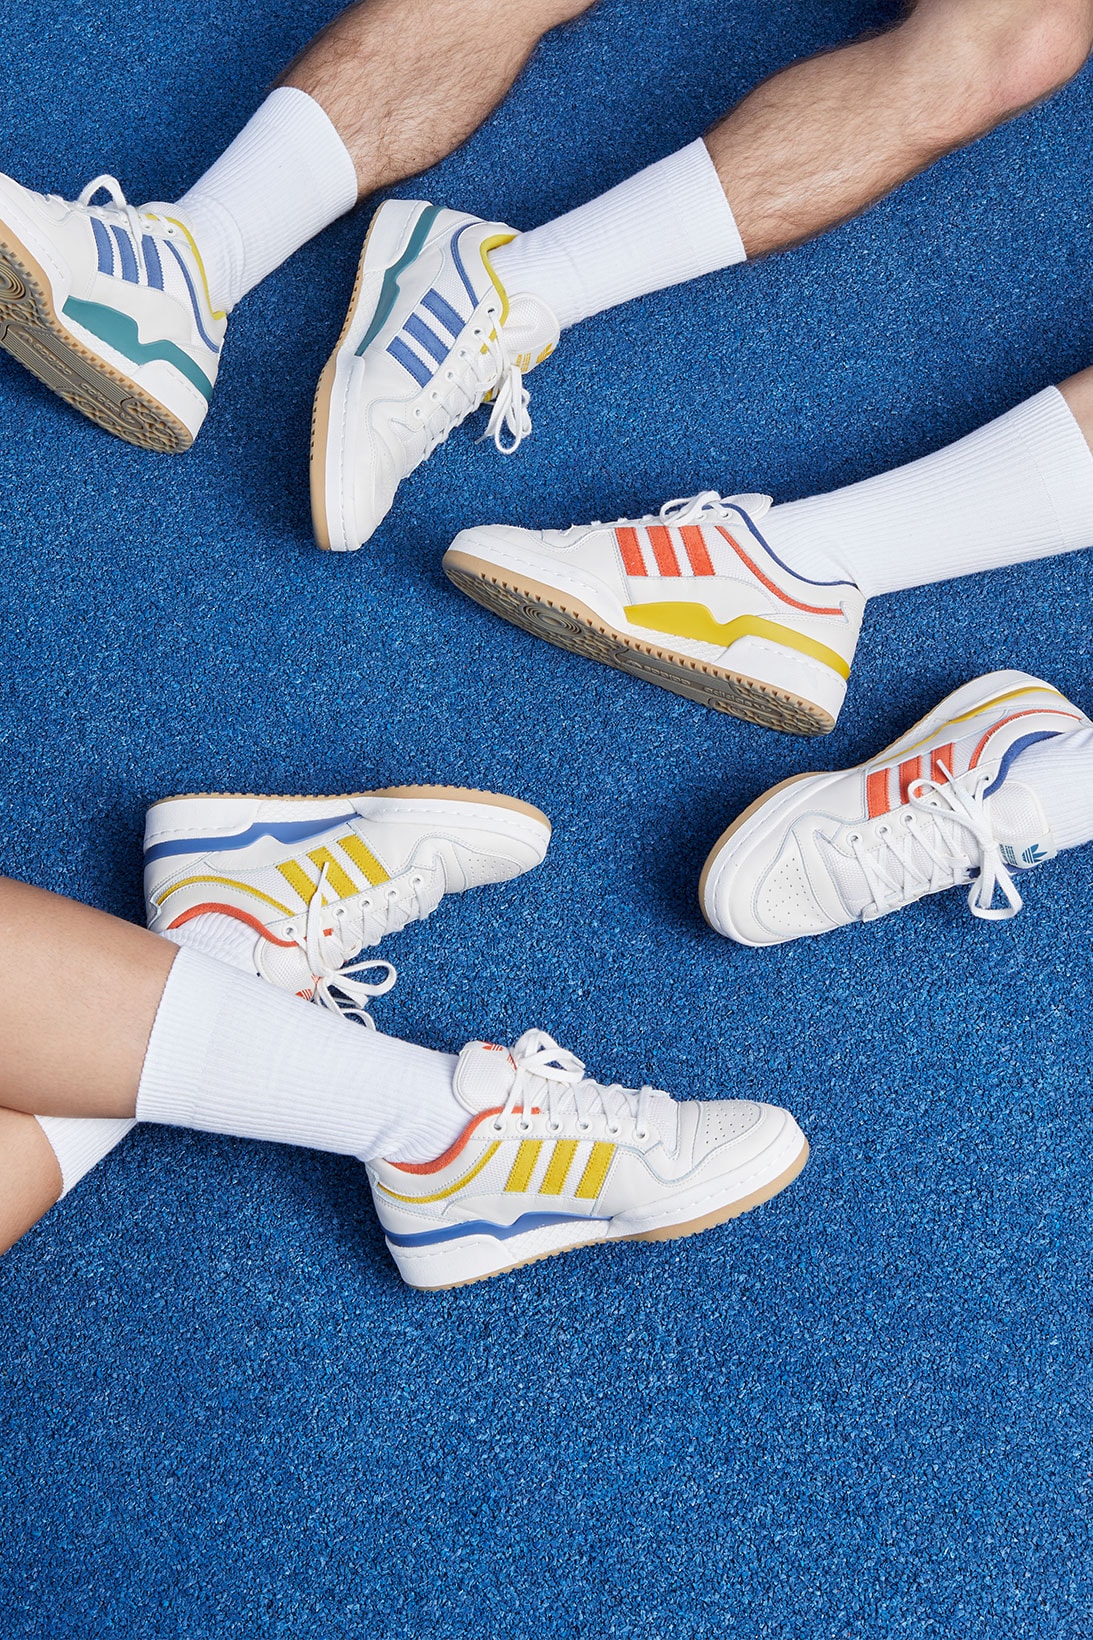 WOOD WOOD adidas Originals Forum Low Collaboration Release Date Info